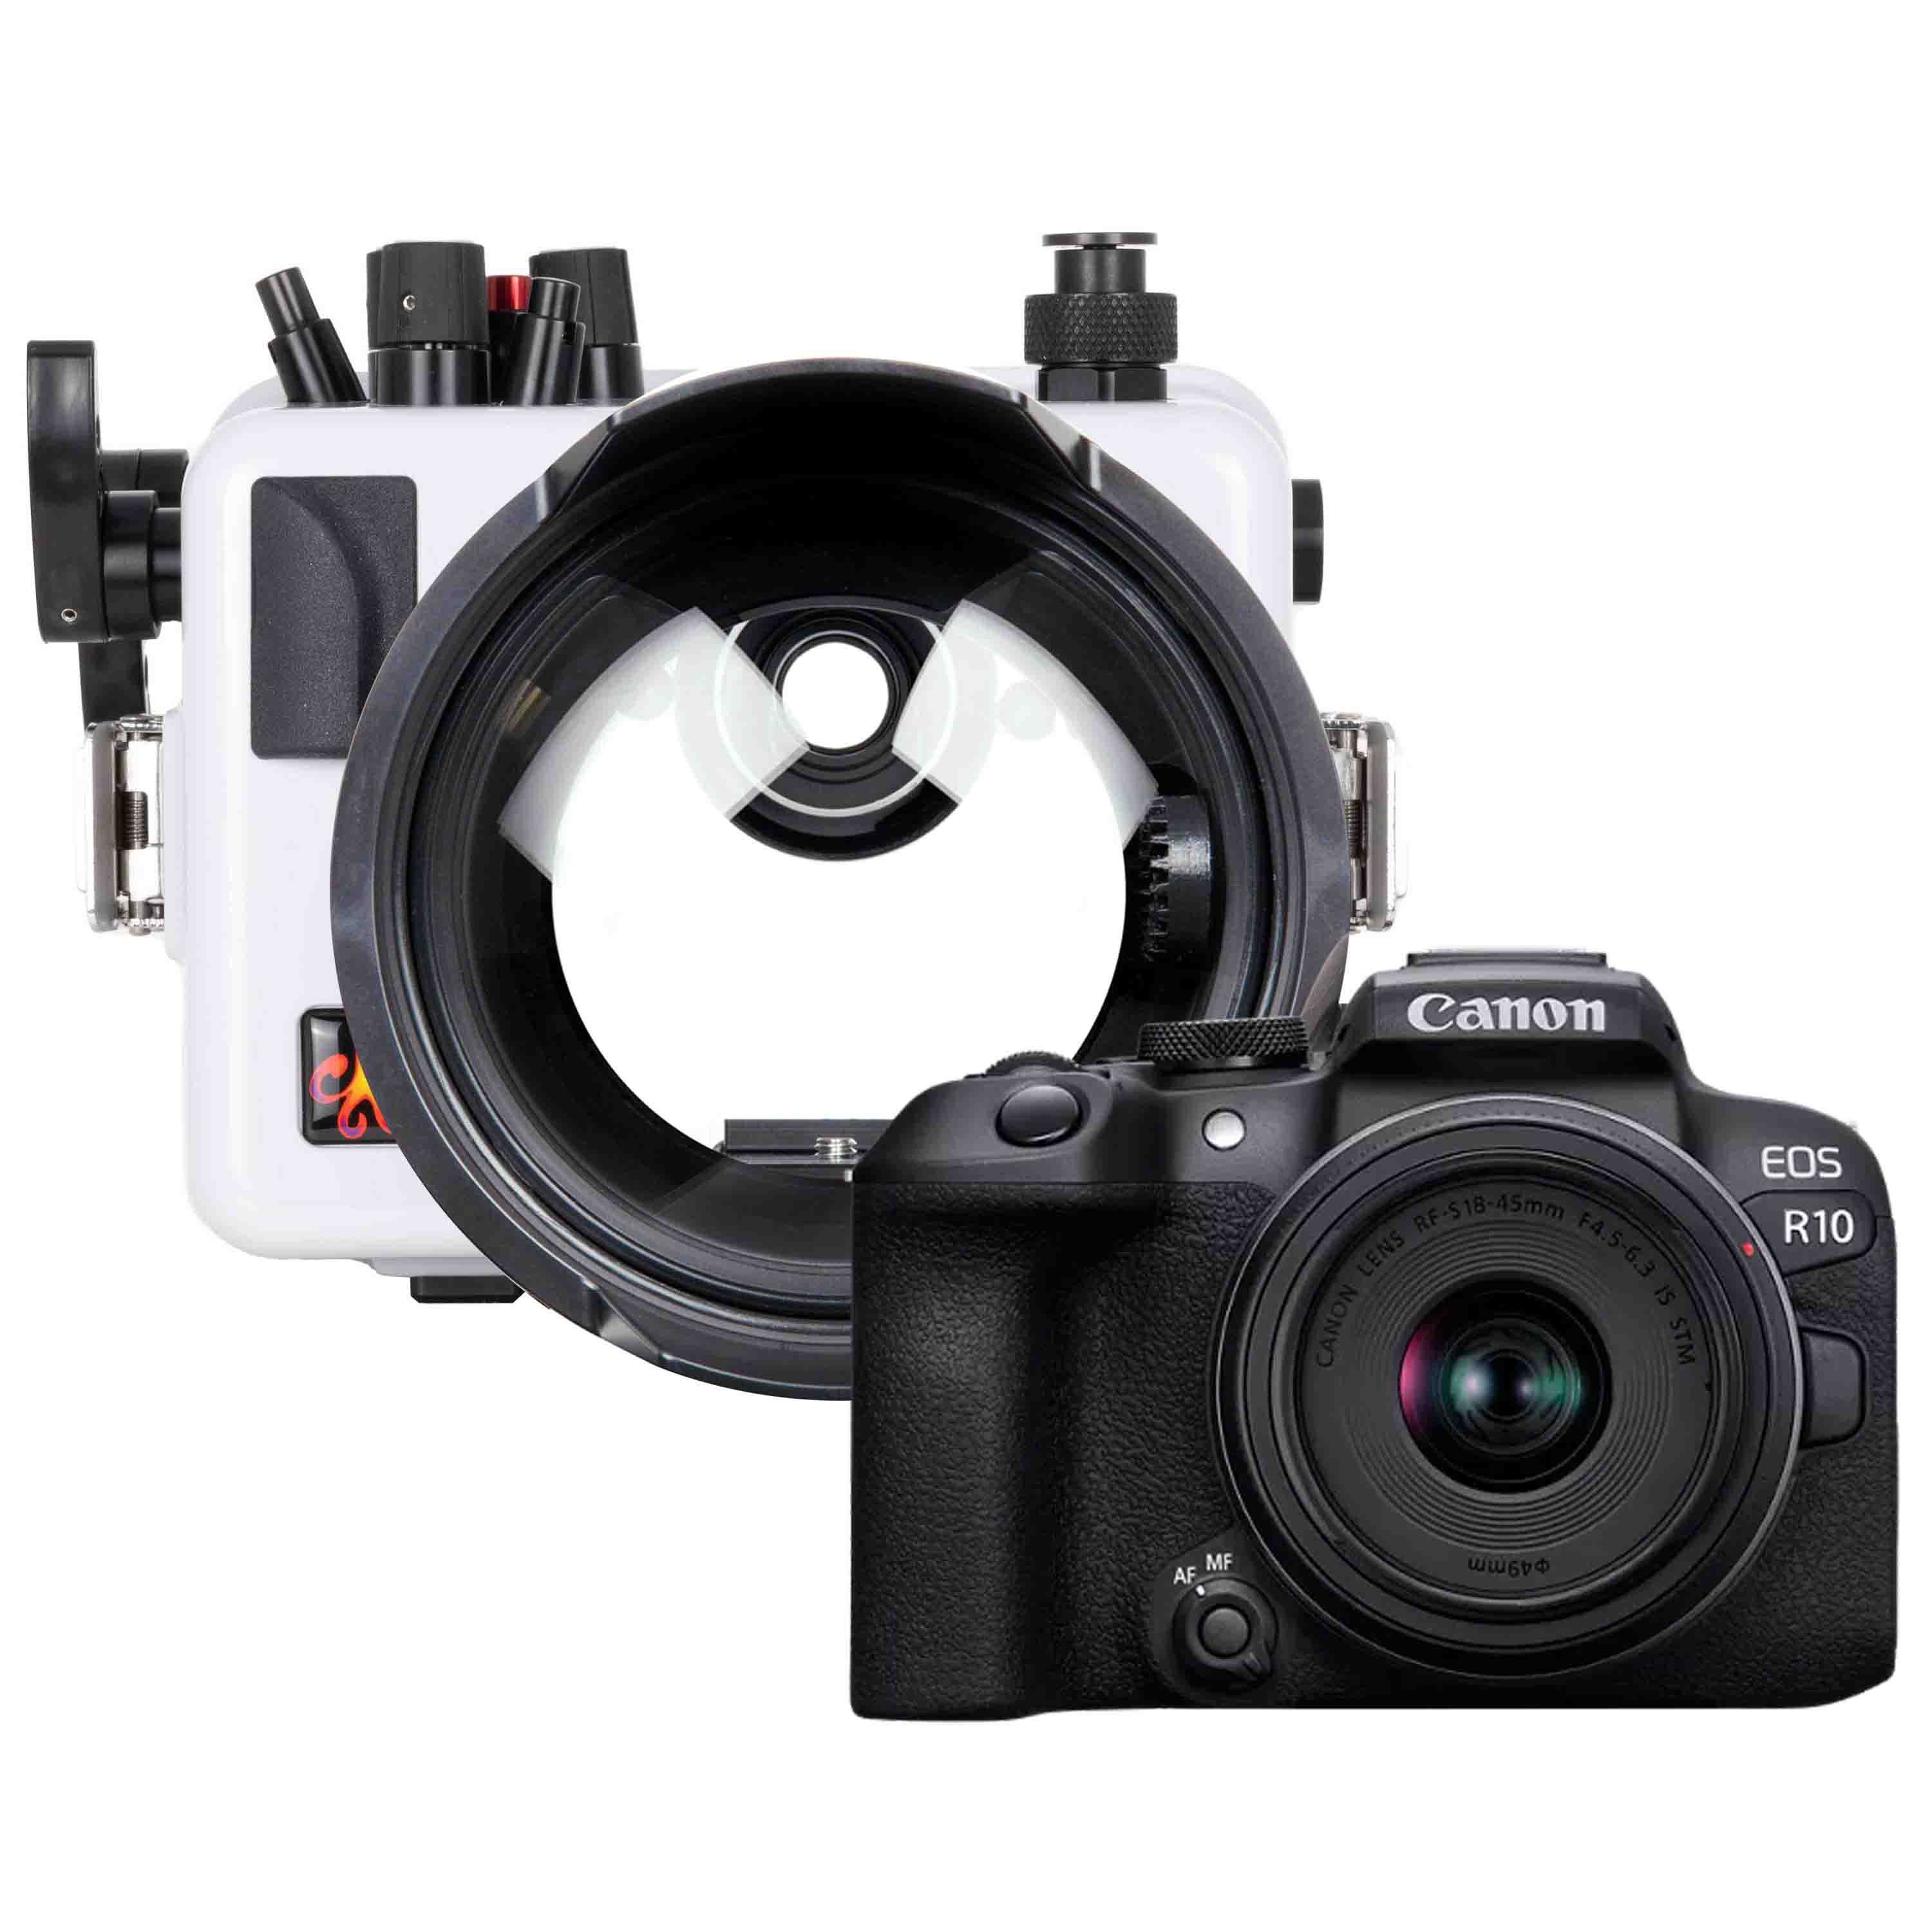 200DLM/D Underwater Housing and Canon EOS R10 Camera